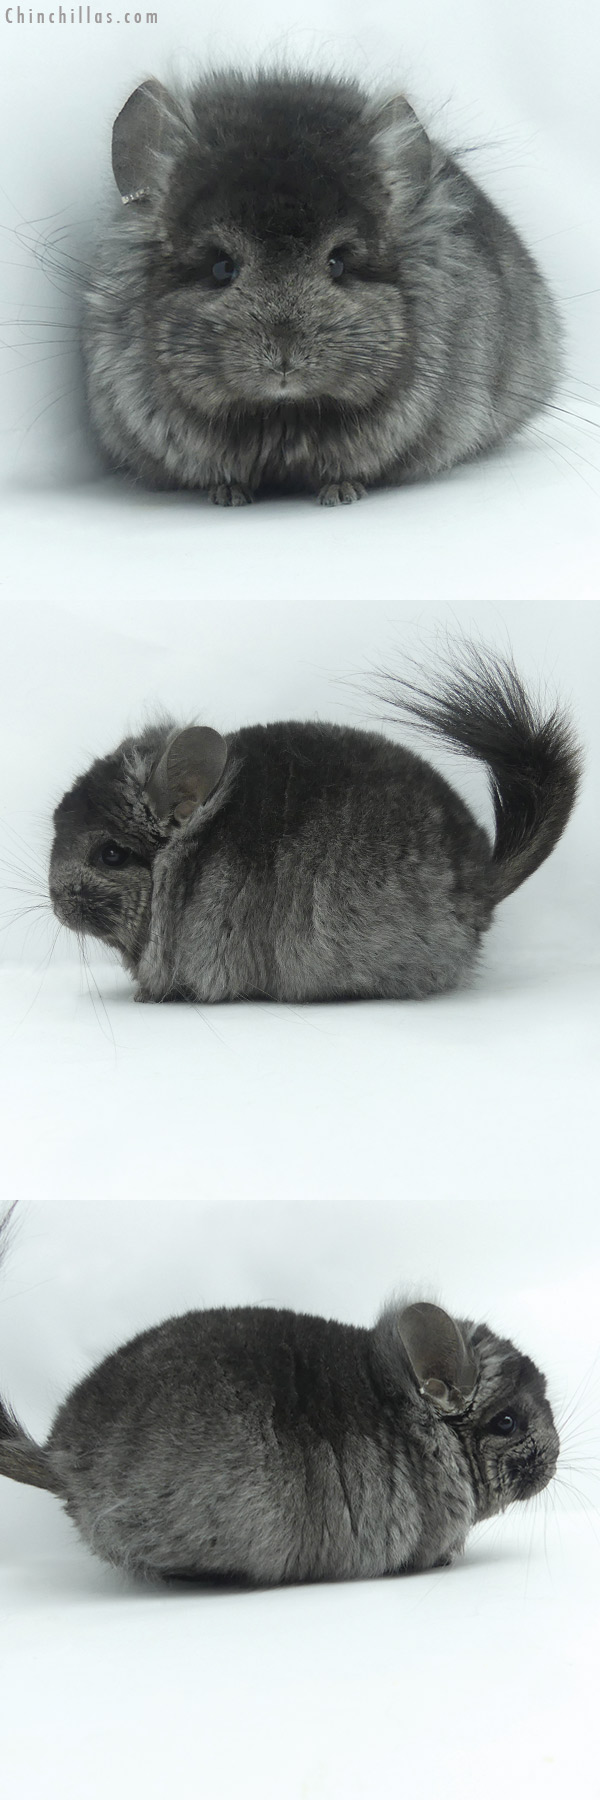 Chinchilla or related item offered for sale or export on Chinchillas.com - 20116 Ebony ( Locken Carrier )  Royal Persian Angora Male Chinchilla